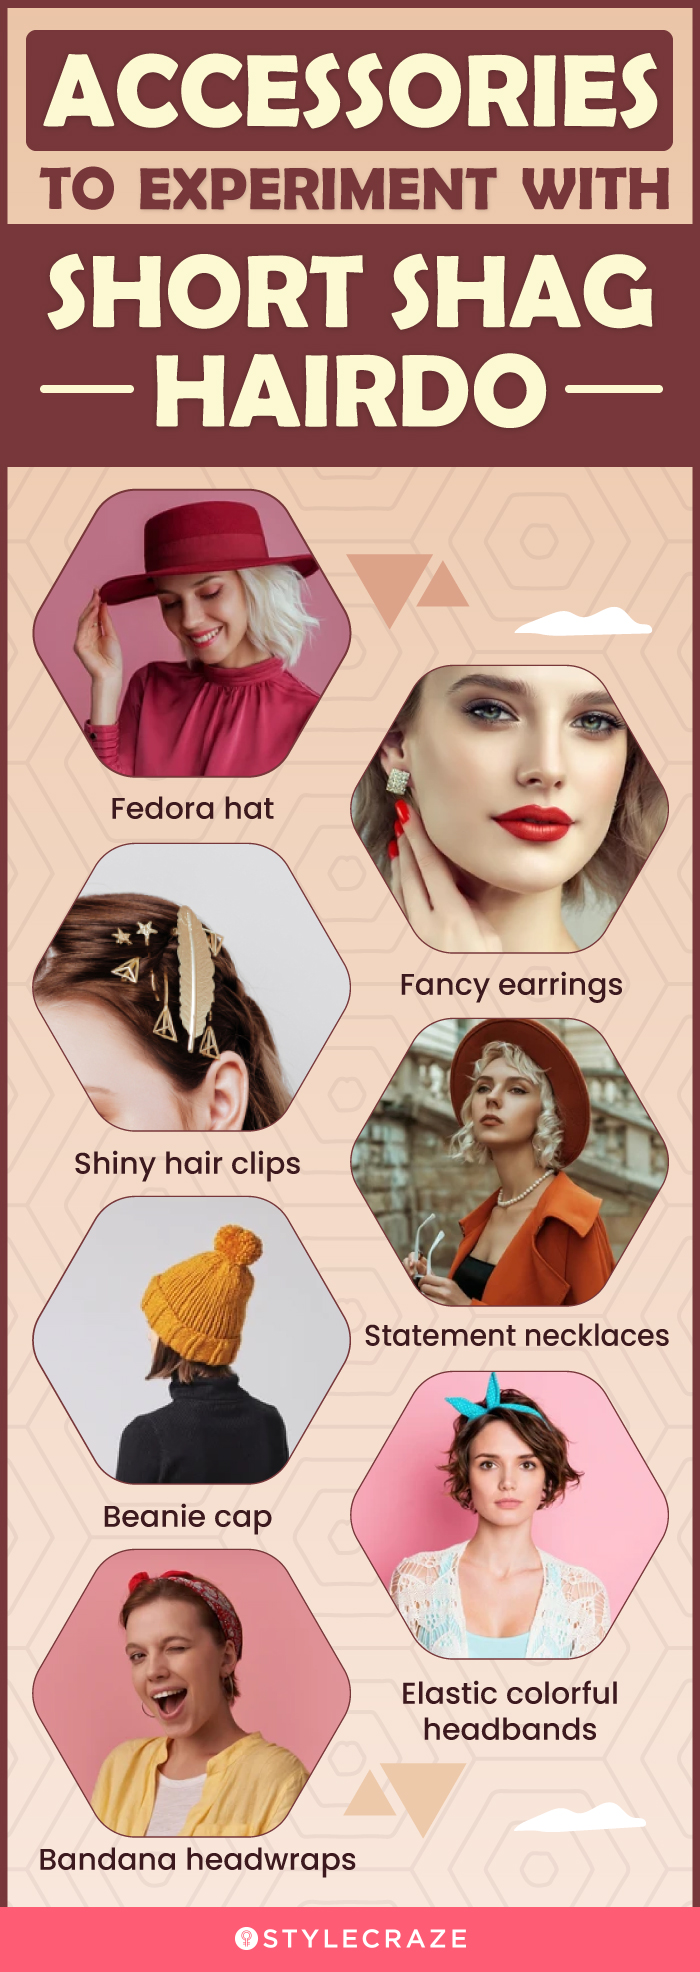 accessories to experiment with short shag hairdo [infographic]